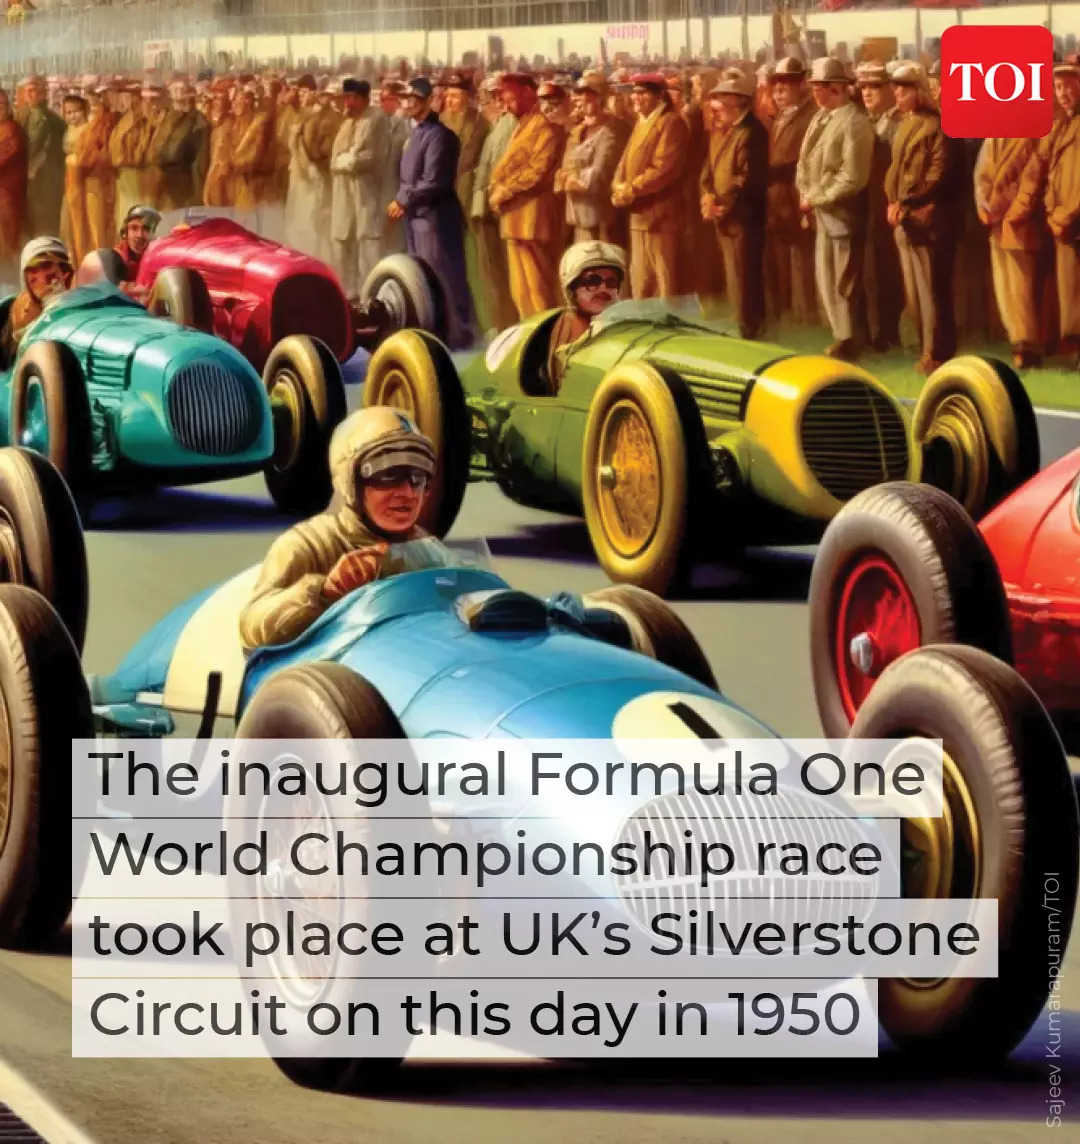 7. Birth of the first world championship motor race